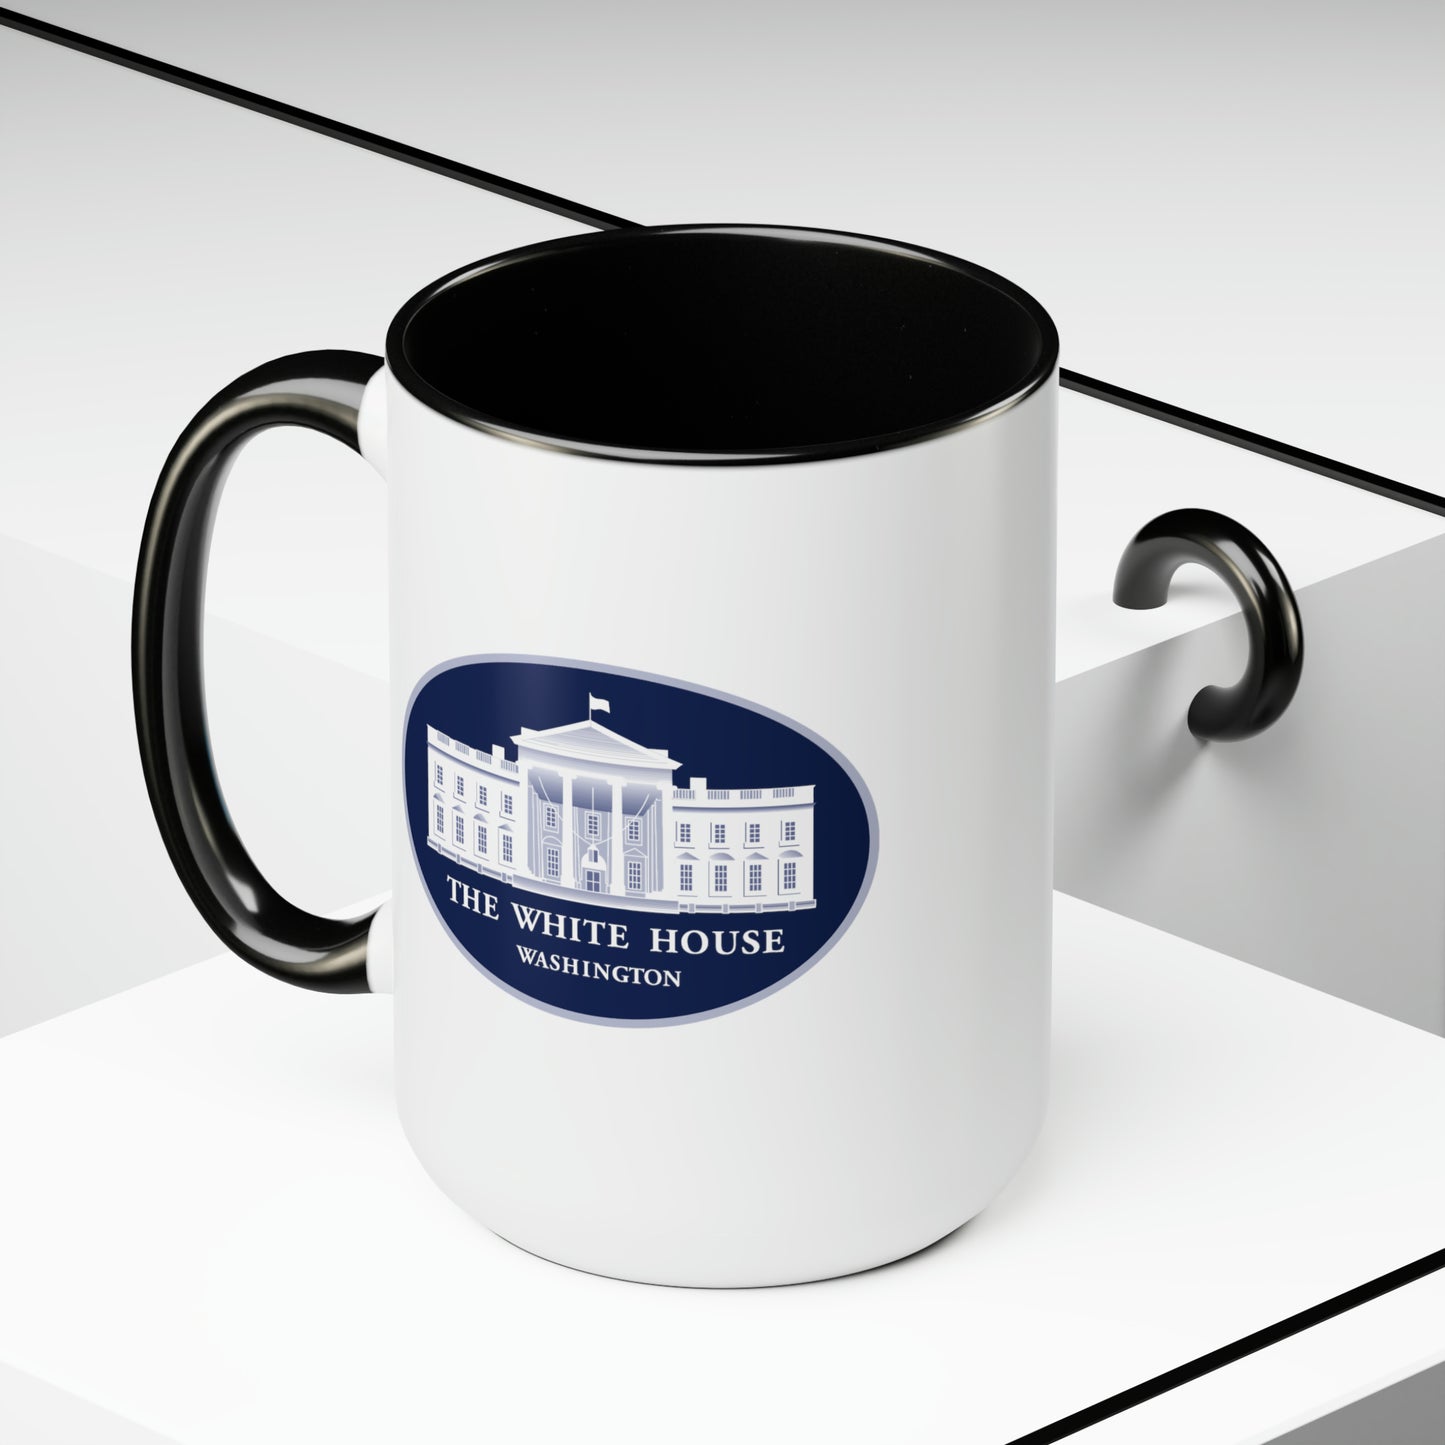 The White House Coffee Mug - Double Sided Black Accent White Ceramic 15oz by TheGlassyLass